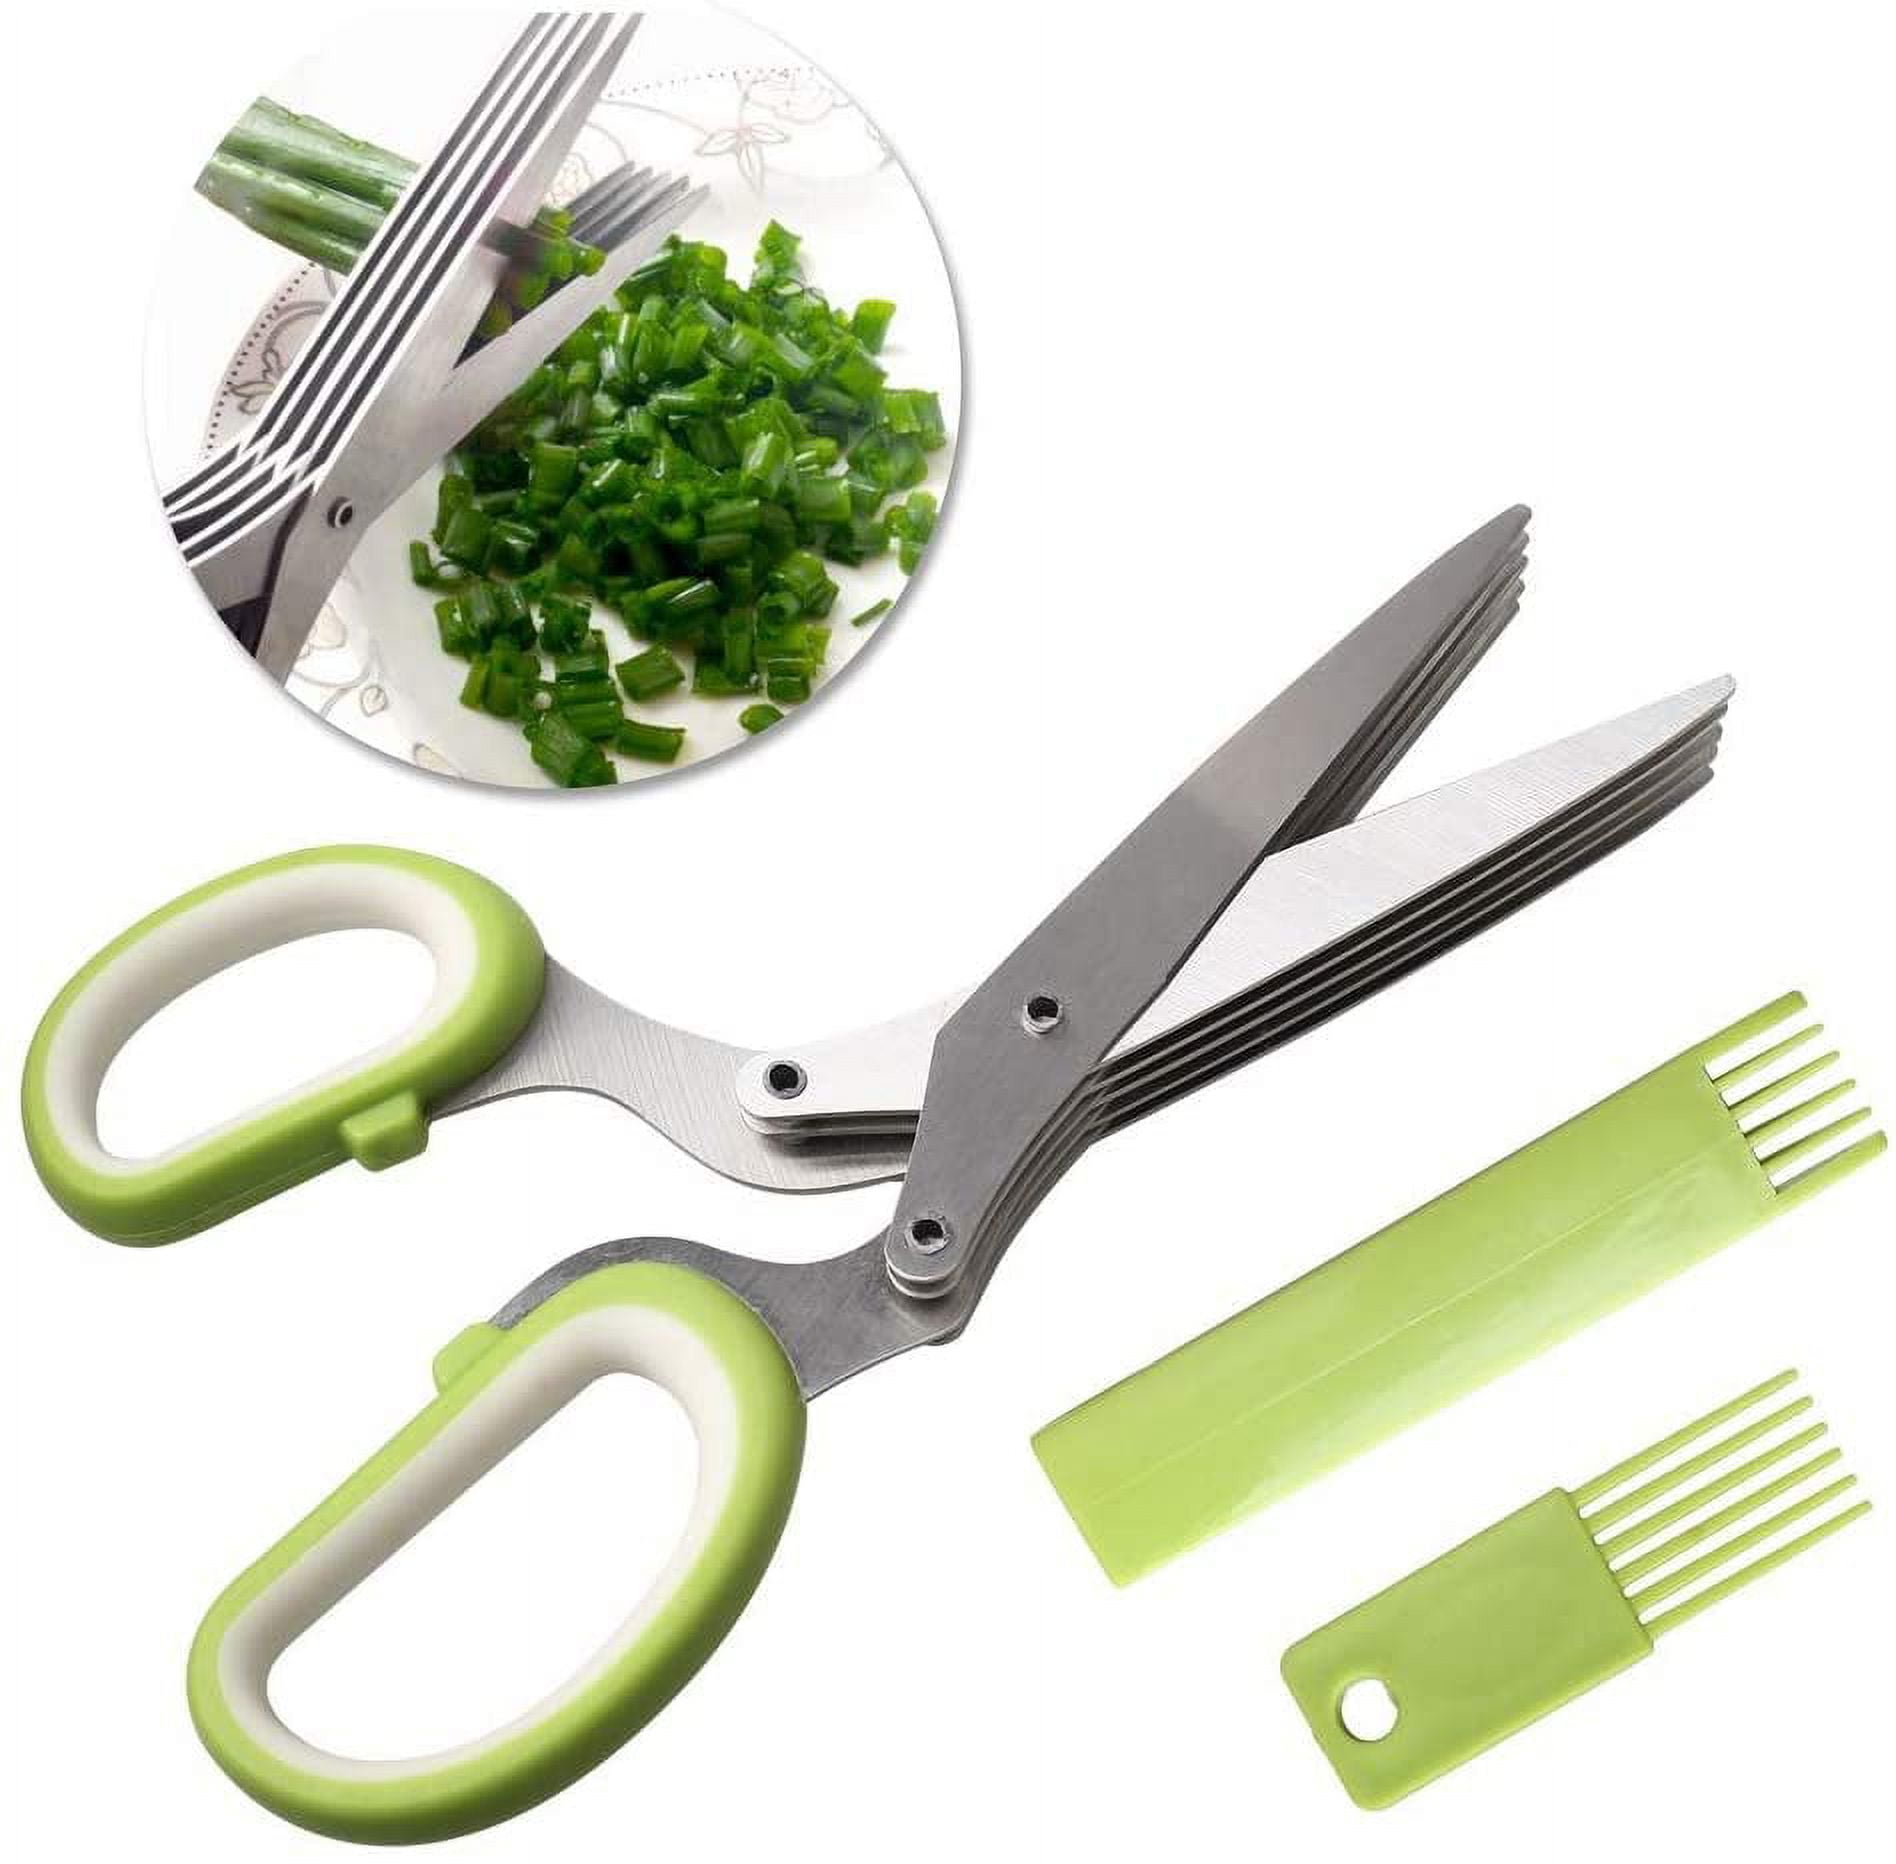 5-bladed herb shears are totally the coolest things ever